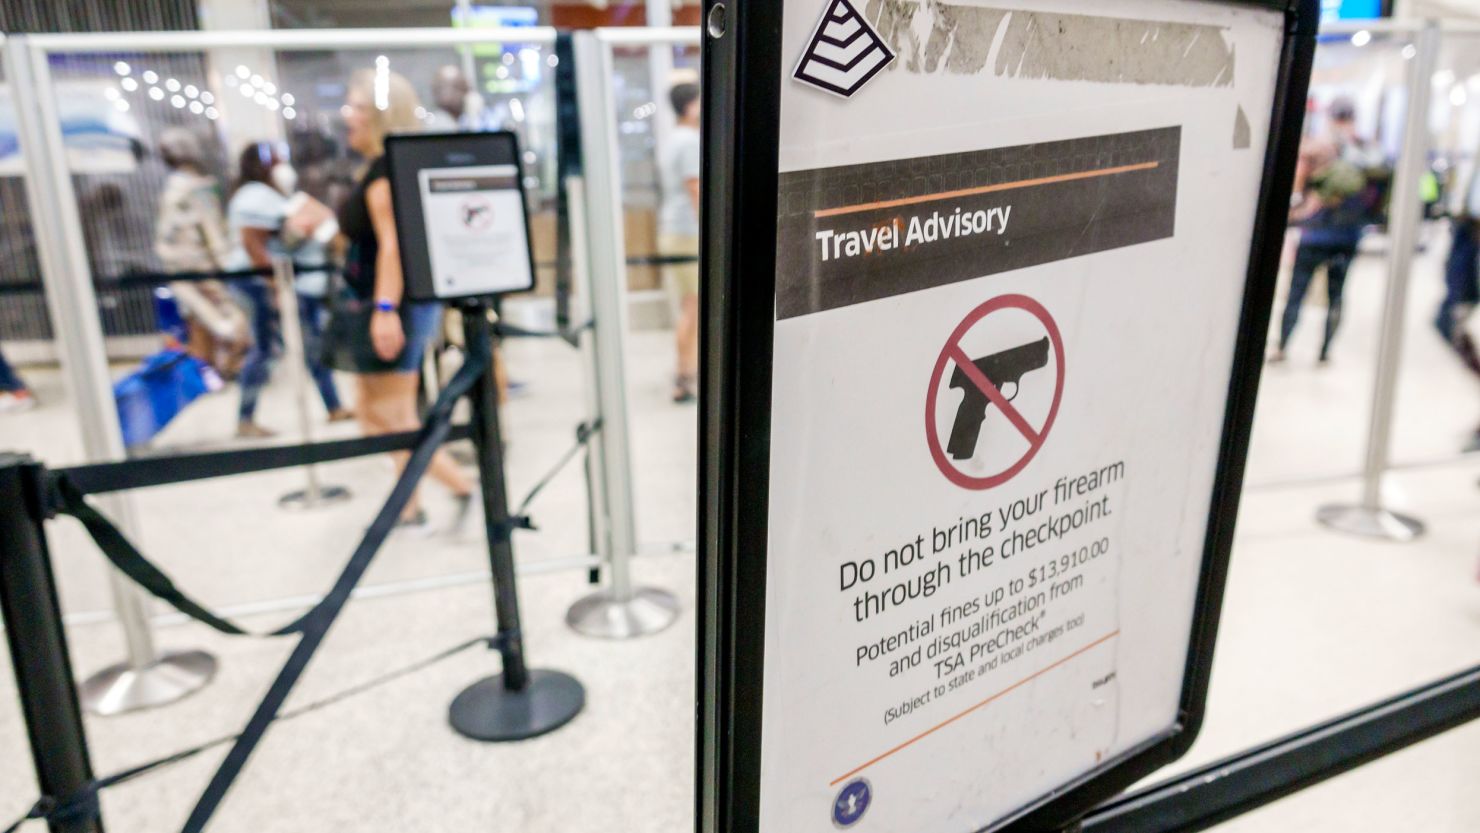 Miami, Florida, Miami International Airport MIA terminal, Transportation Security Administration TSA, check-point, travel advisory sign, firearms guns prohibited. (Photo by: Jeffrey Greenberg/Universal Images Group via Getty Images)